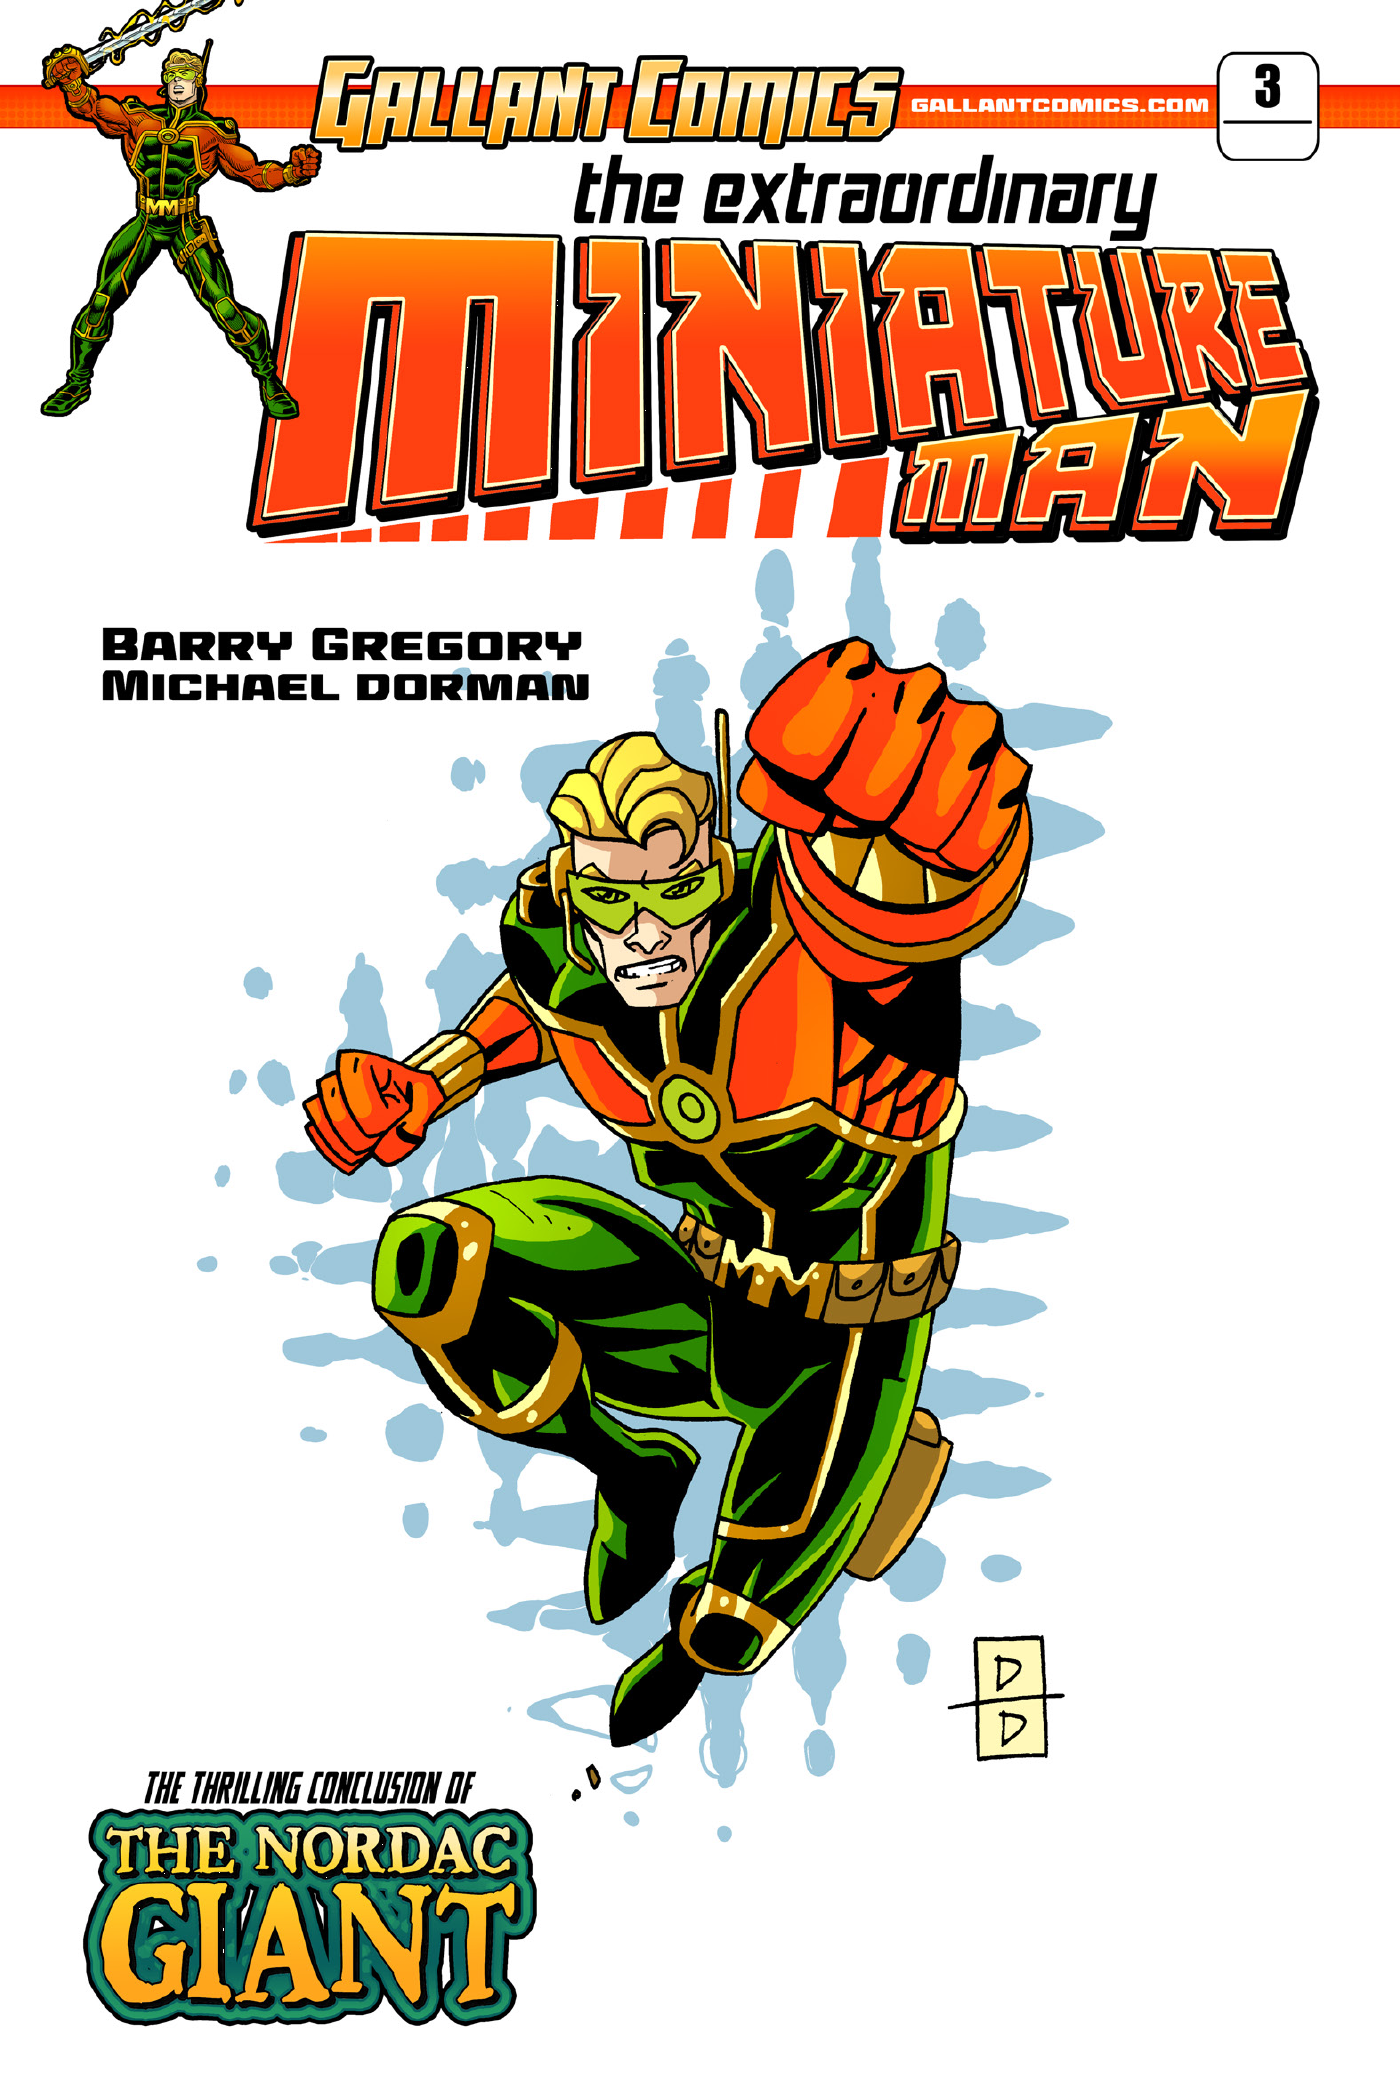 Read online The Extraordinary Miniature Man comic -  Issue #3 - 3